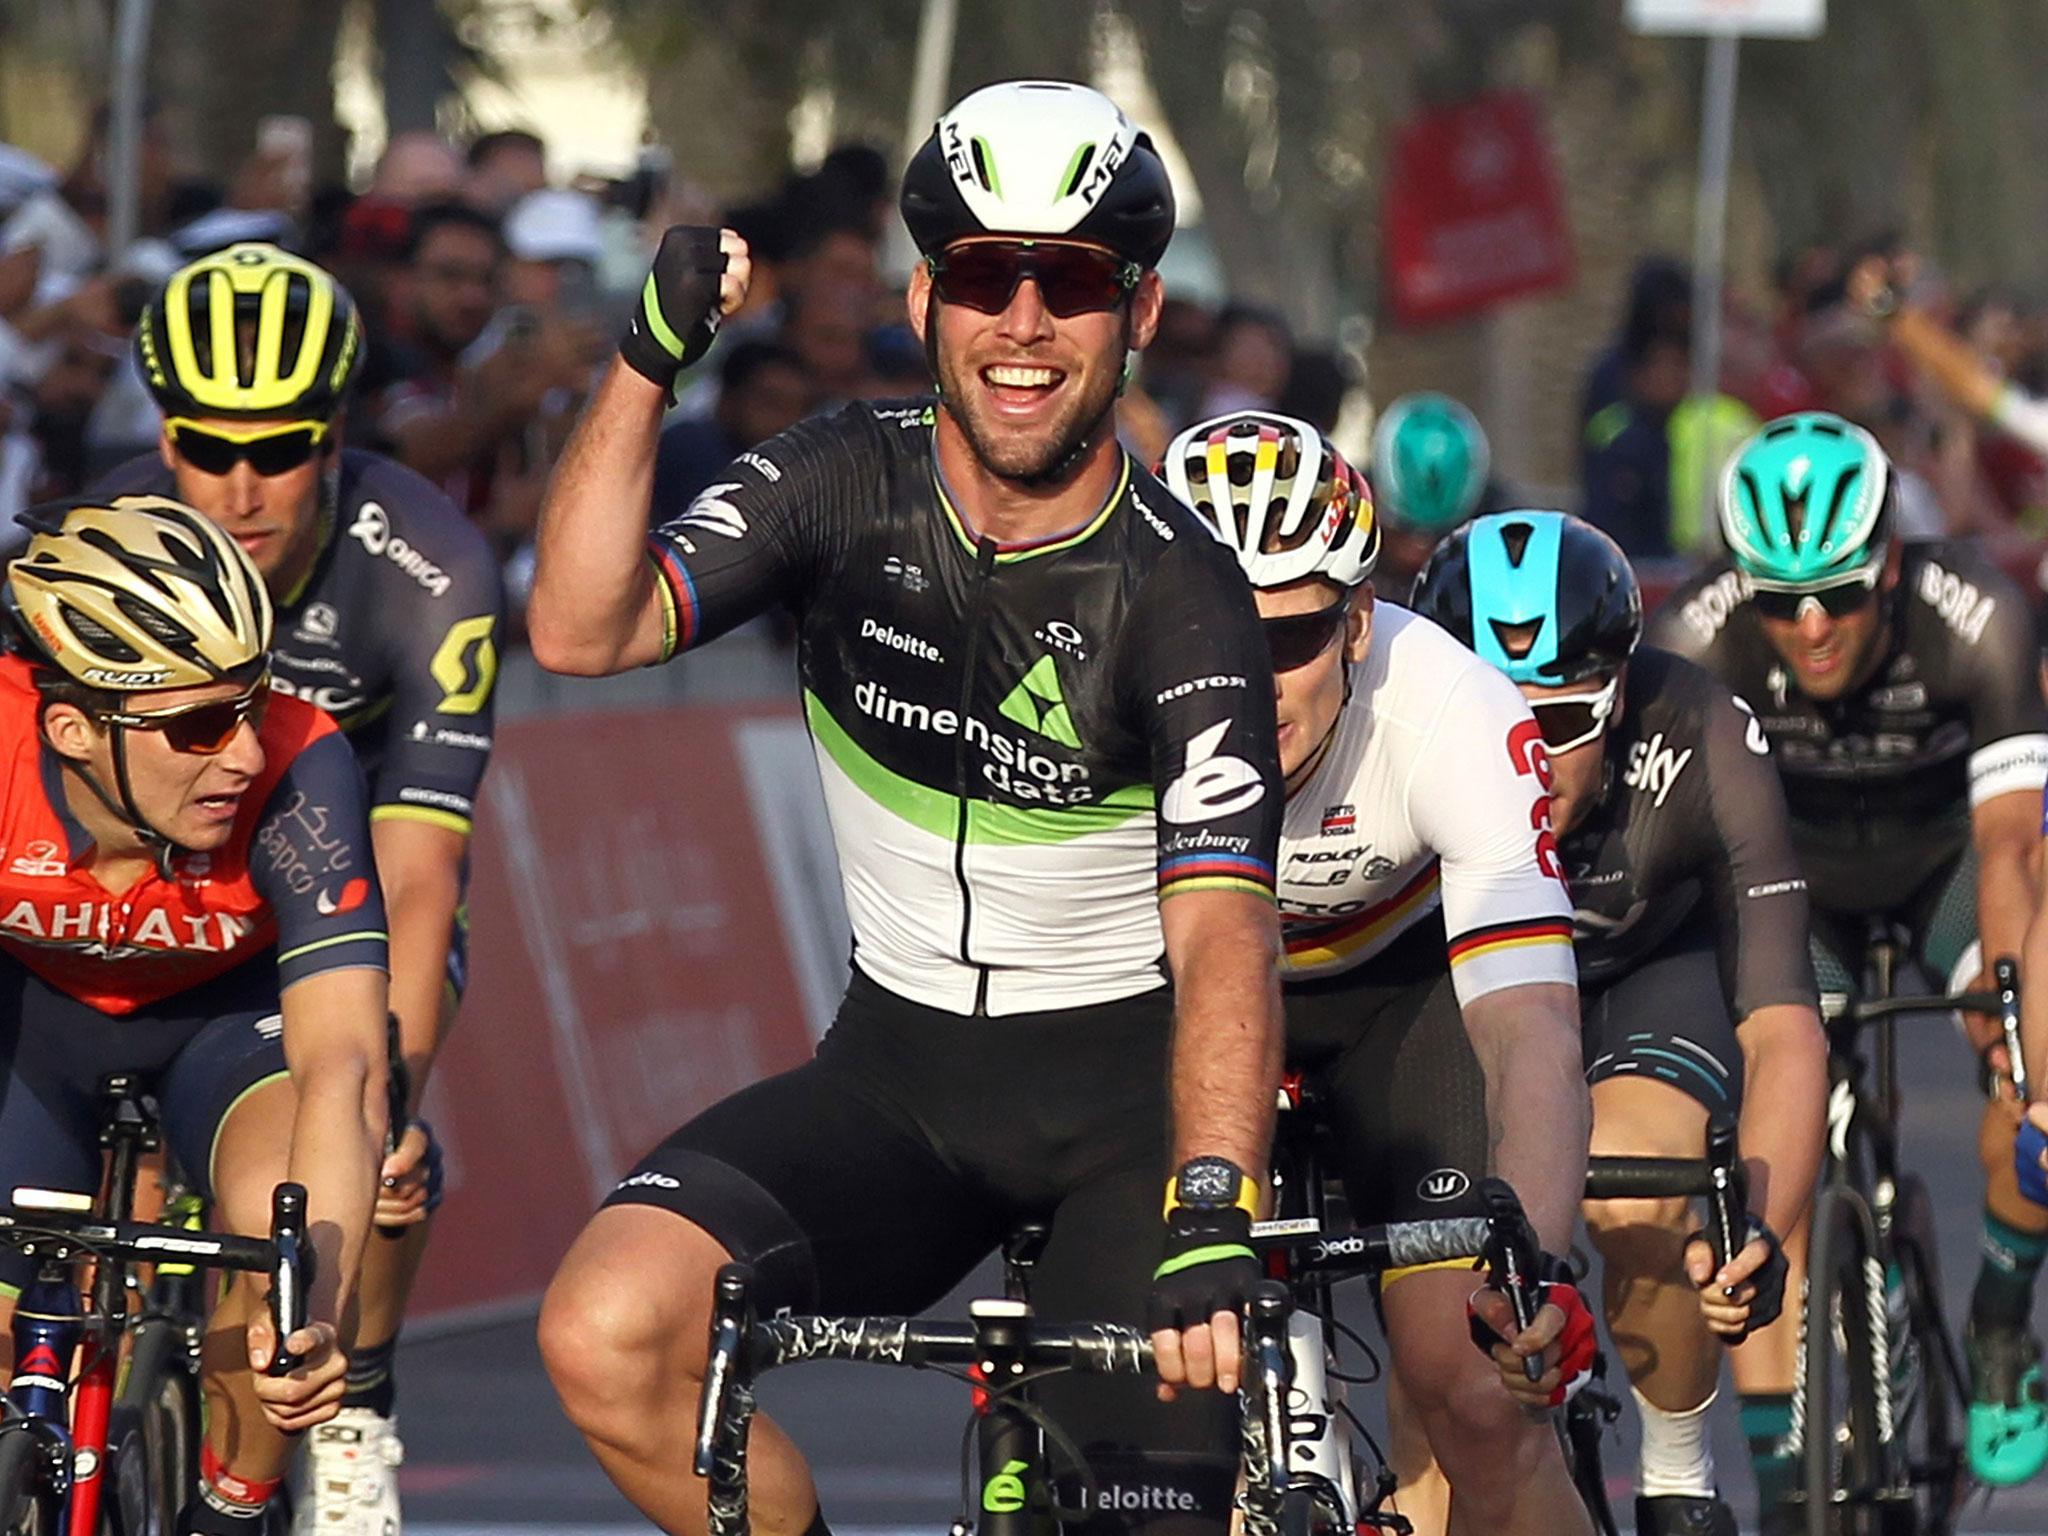 Mark Cavendish is set to take to the start line of this year's Tour